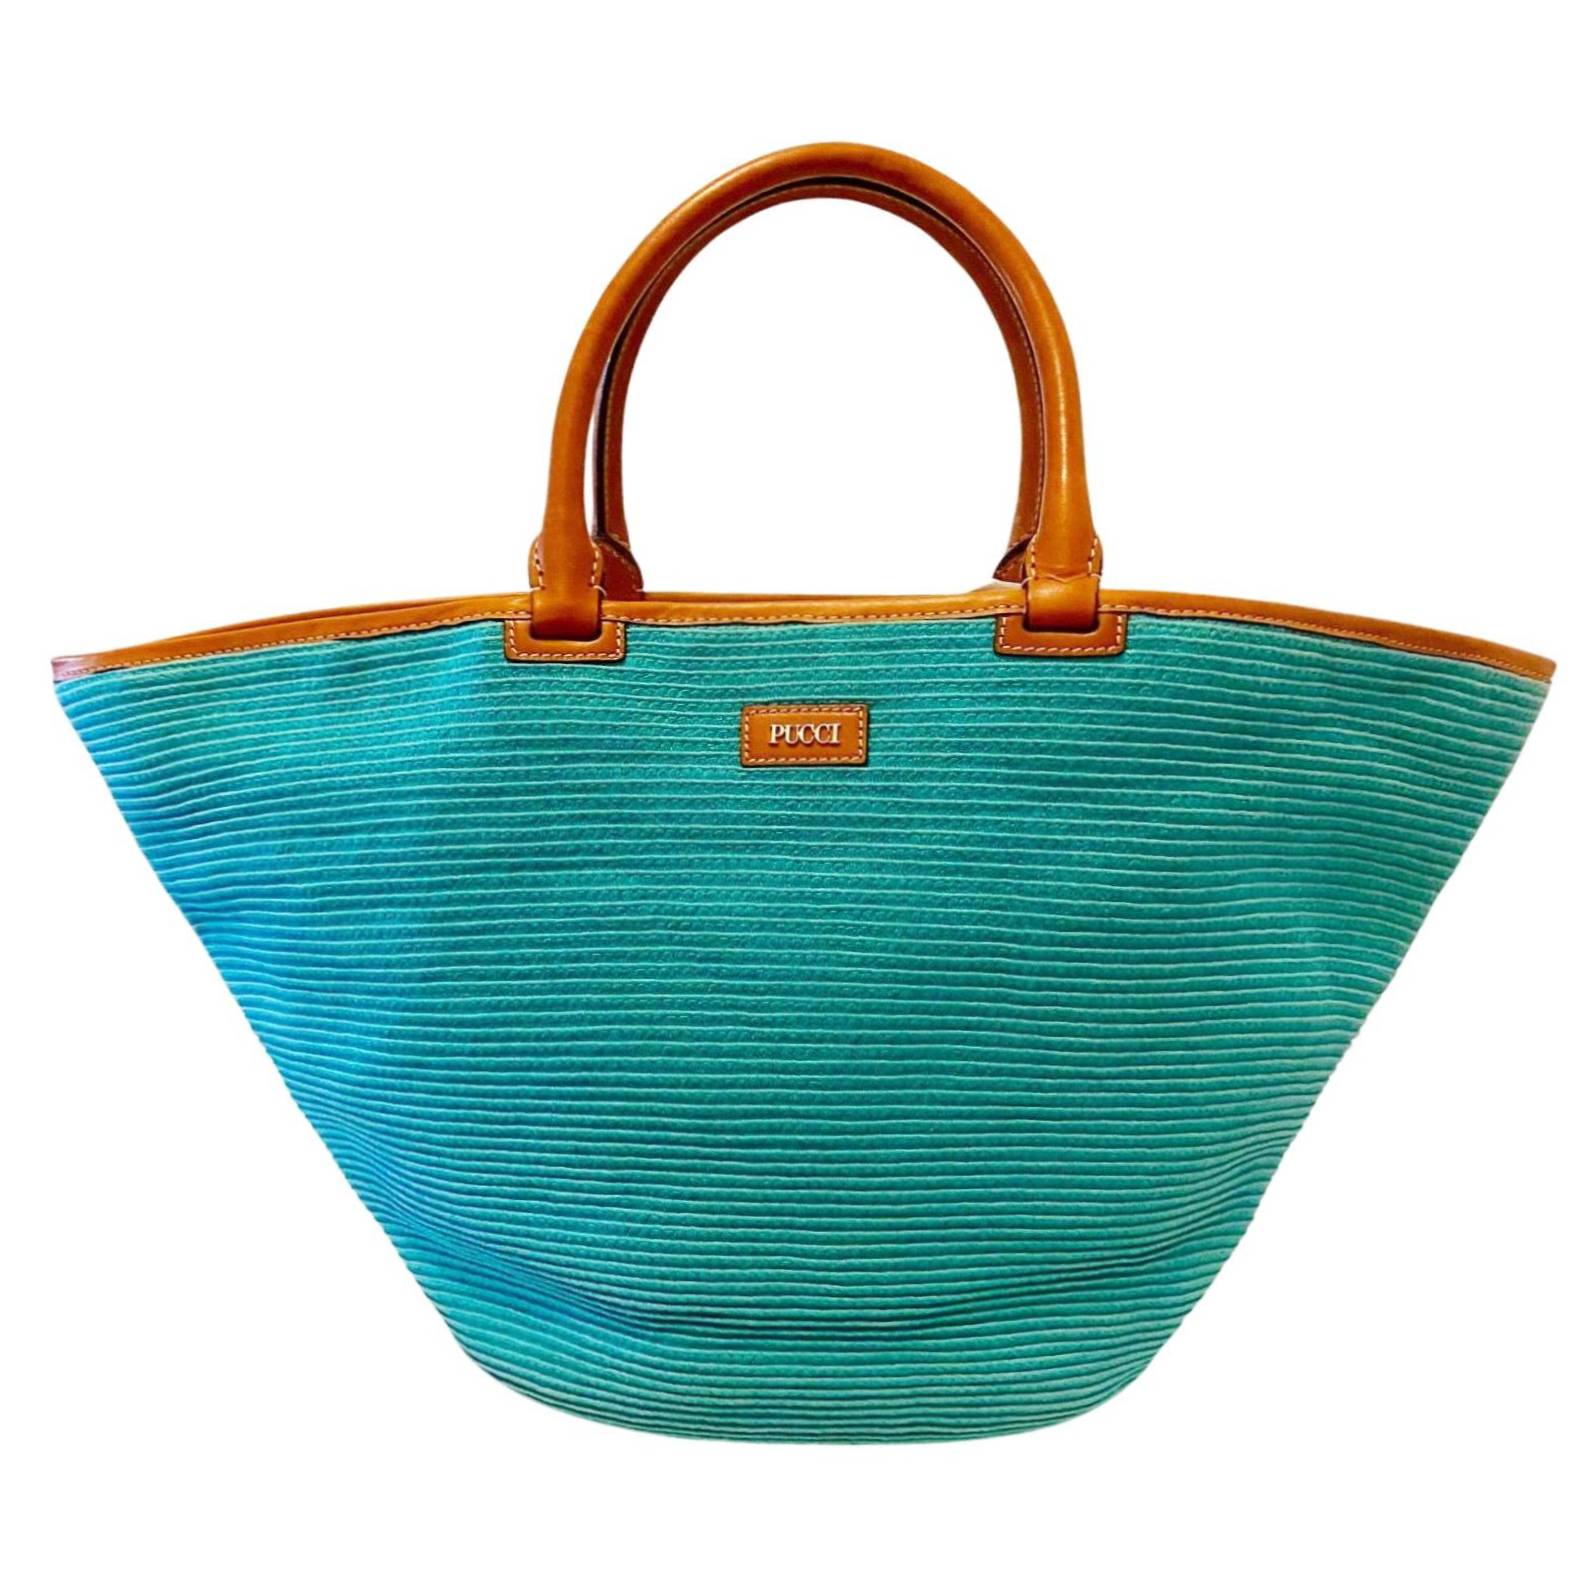 2000s Emilio Pucci Turquoise Canvas Tote Bag - style - CHNGR